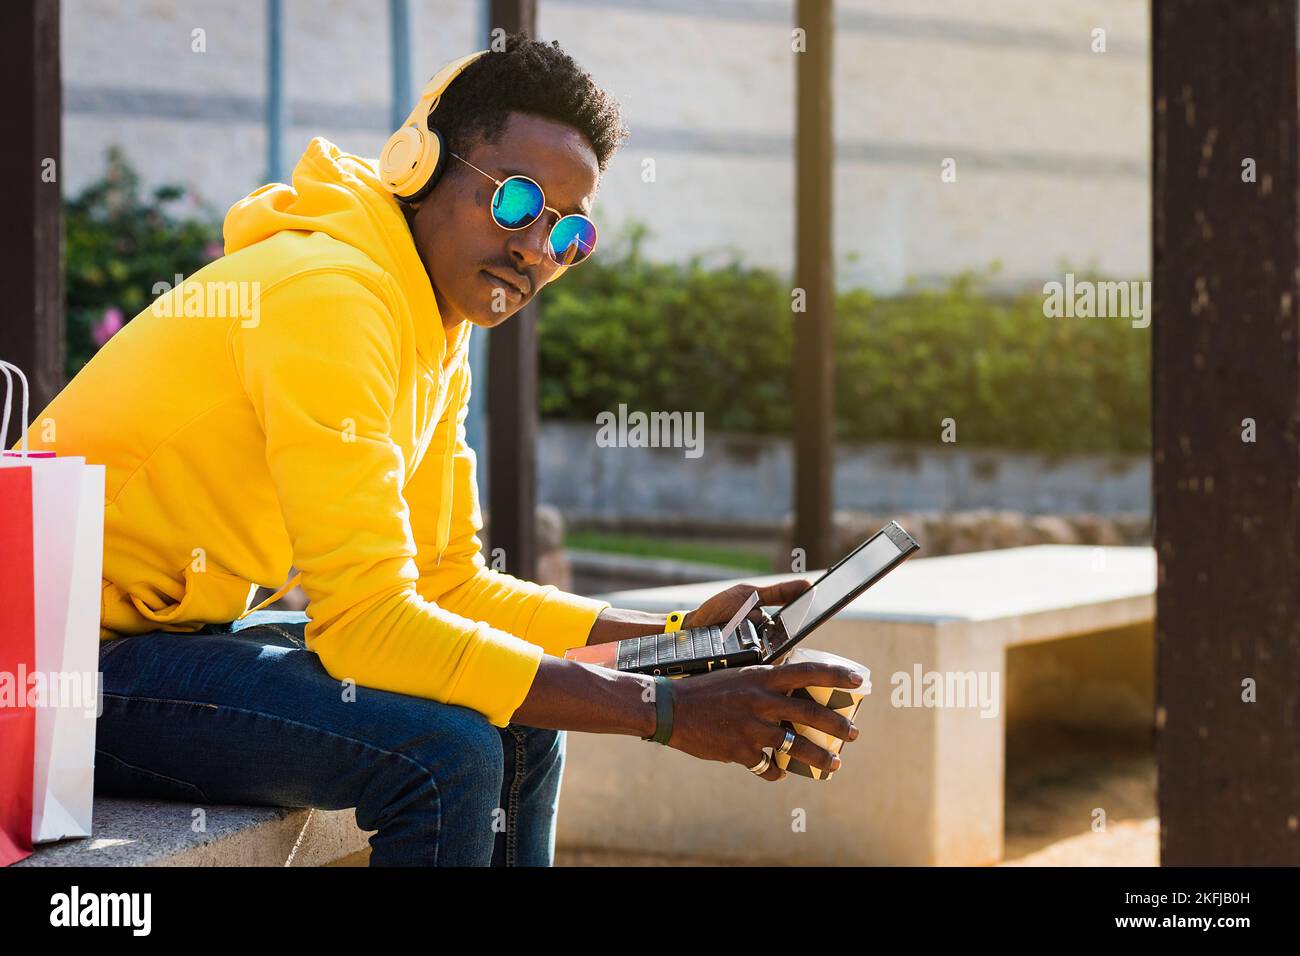 A young African man dressed in a yellow sweatshirt, blue jeans and sunglasses sits on a park bench holding a laptop and a glass of coffee. Above the k Stock Photo